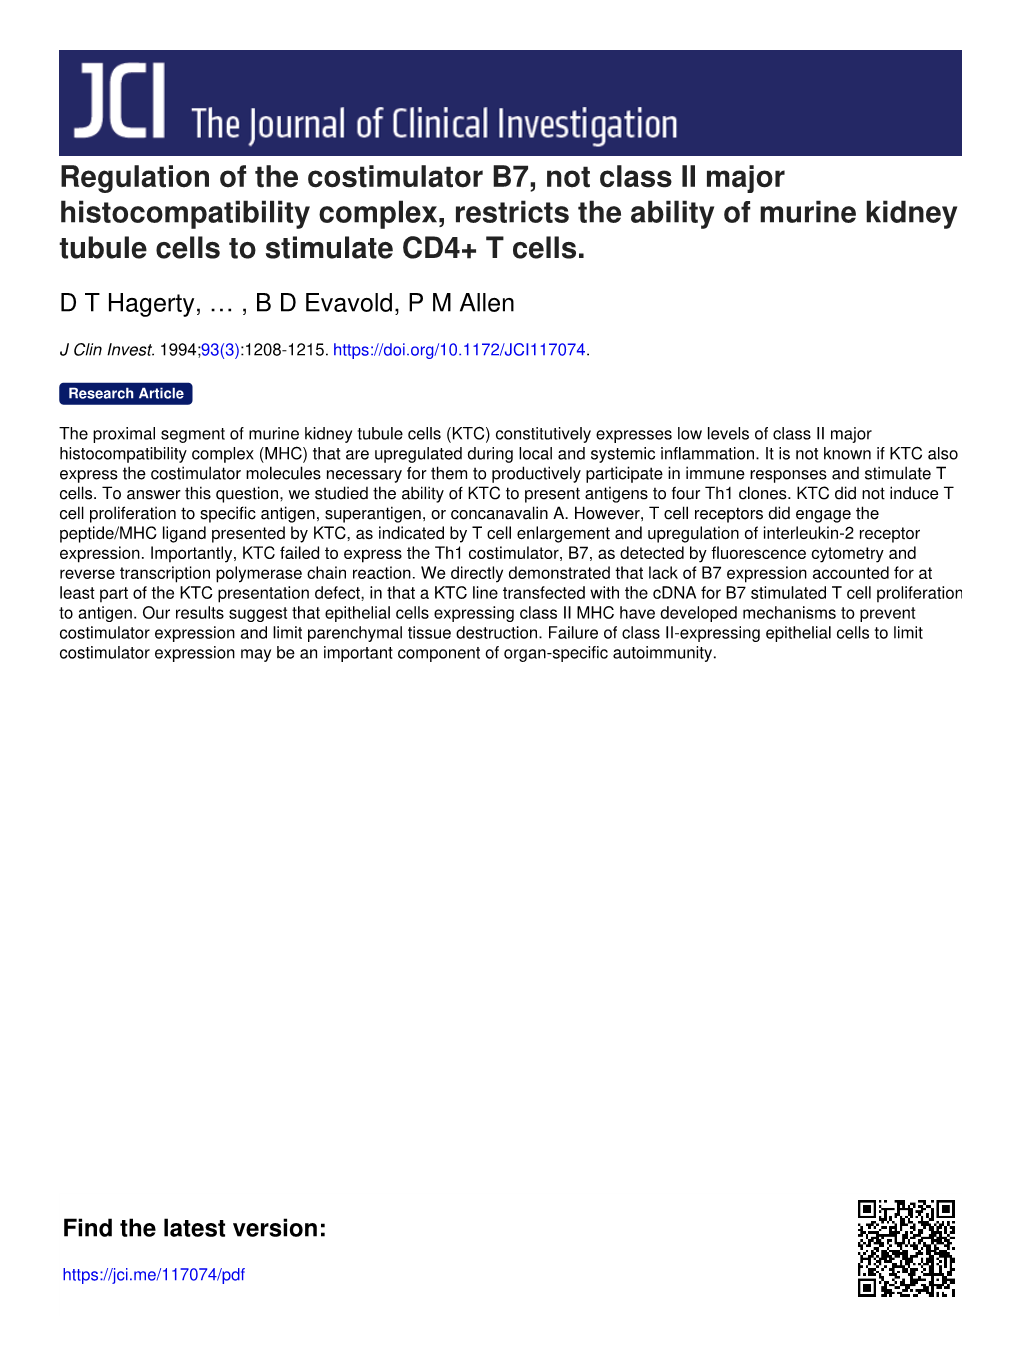 Regulation of the Costimulator B7, Not Class II Major Histocompatibility Complex, Restricts the Ability of Murine Kidney Tubule Cells to Stimulate CD4+ T Cells